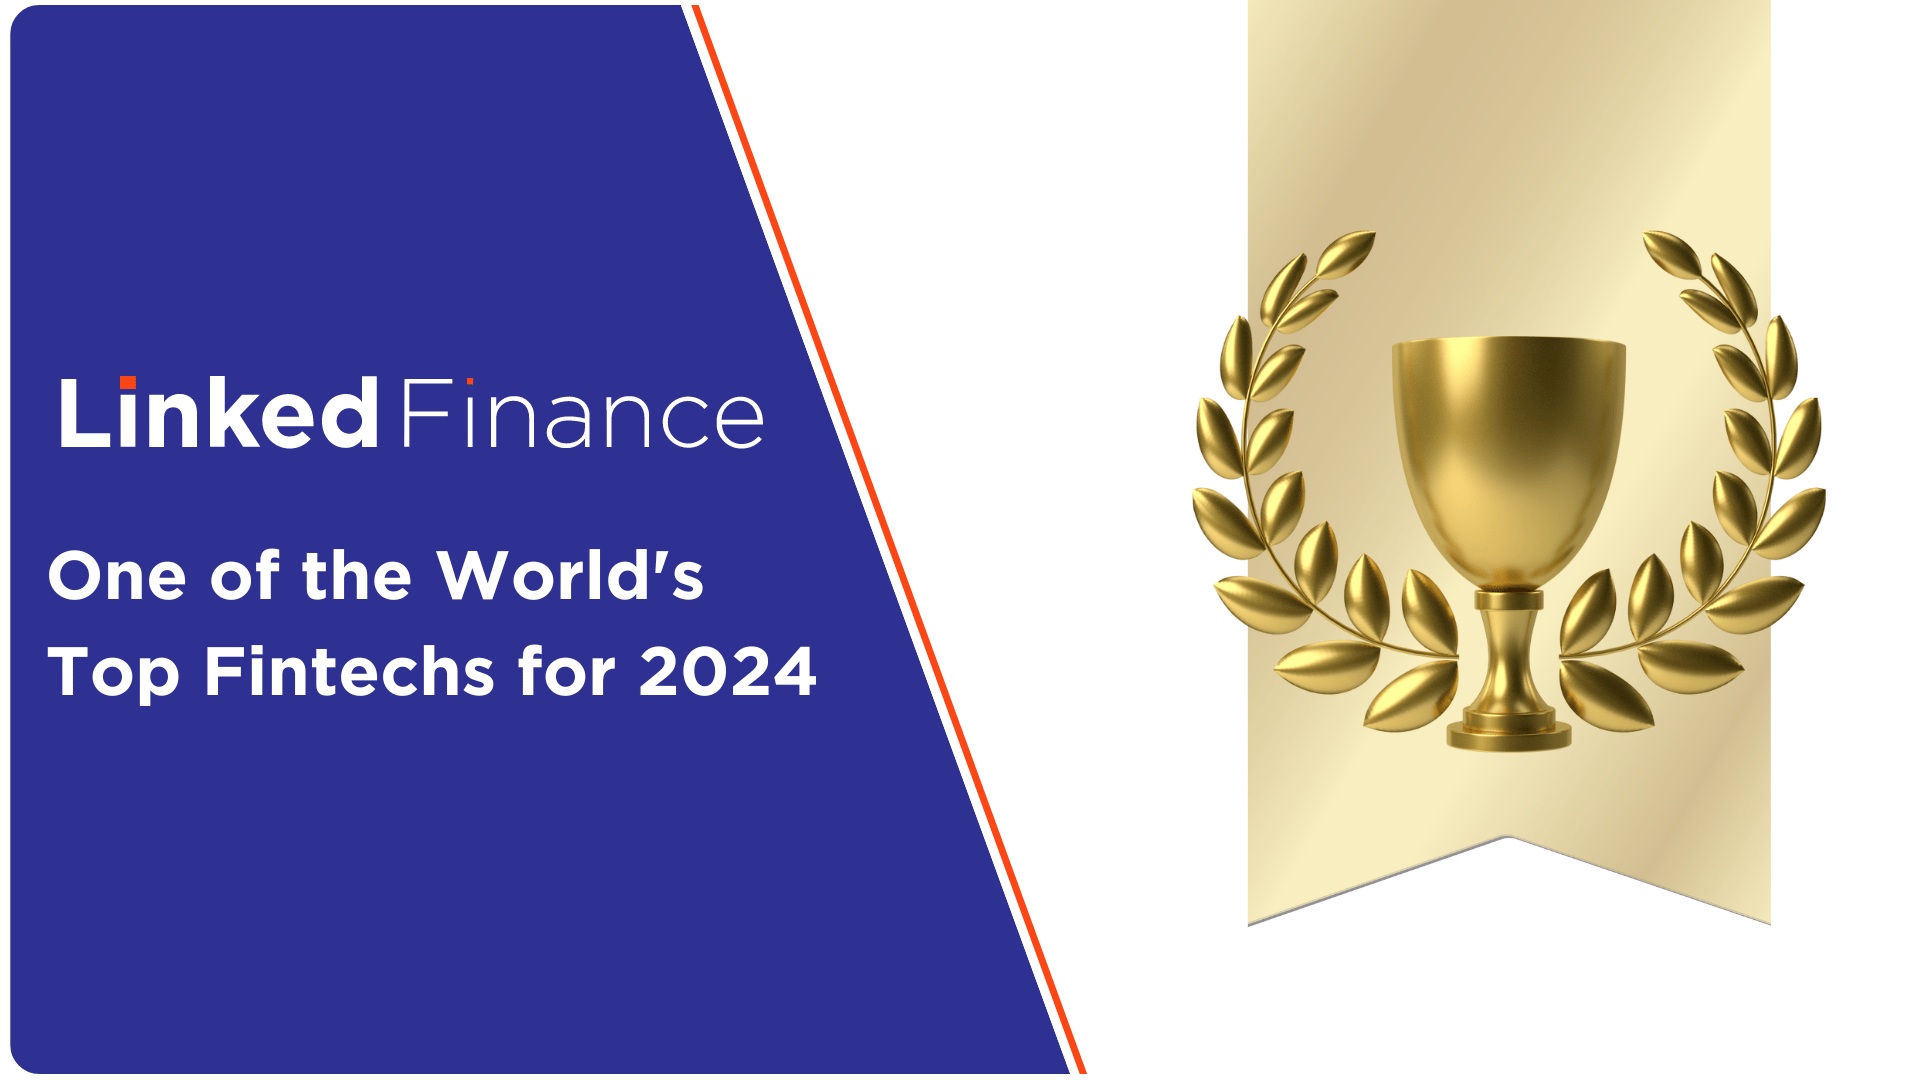 Linked Finance Named One of the World's Top Fintech for 2024